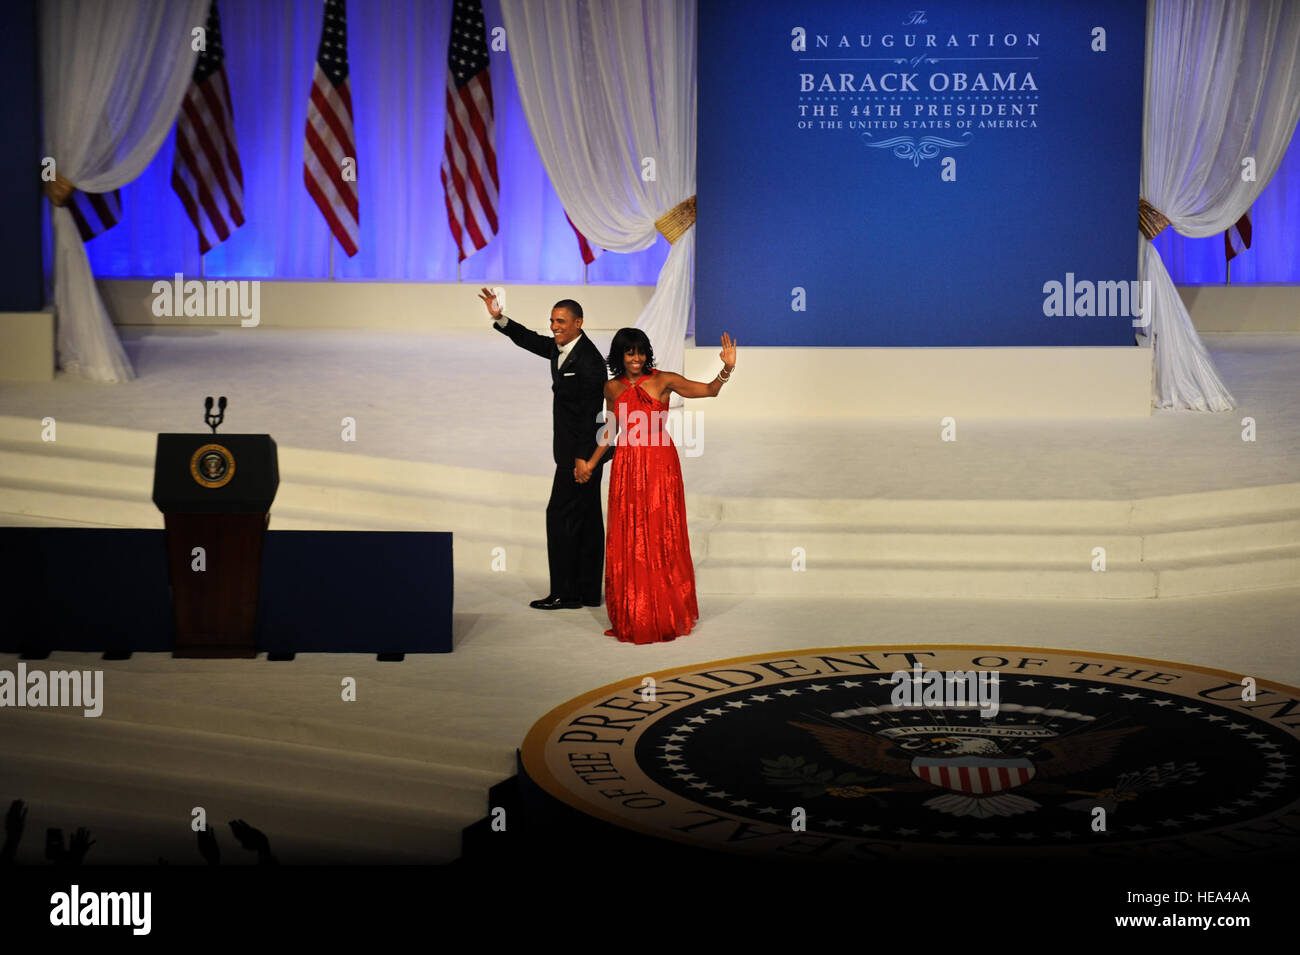 President Barack Obama and his wife Michelle Obama wave at the crowd as they depart from the 2013 Commander In Chief inaugural ball at the Walter E. Washington Convention Center in Washington D.C., Jan. 21, 2013.  Throughout the 57th Presidential Inauguration, the Obama and Biden families have taken the opportunity to highlight the spirit of service and selflessness seen everyday U.S. military men, women and their families.  Chief Master Sgt. Robert W. Valenca Stock Photo